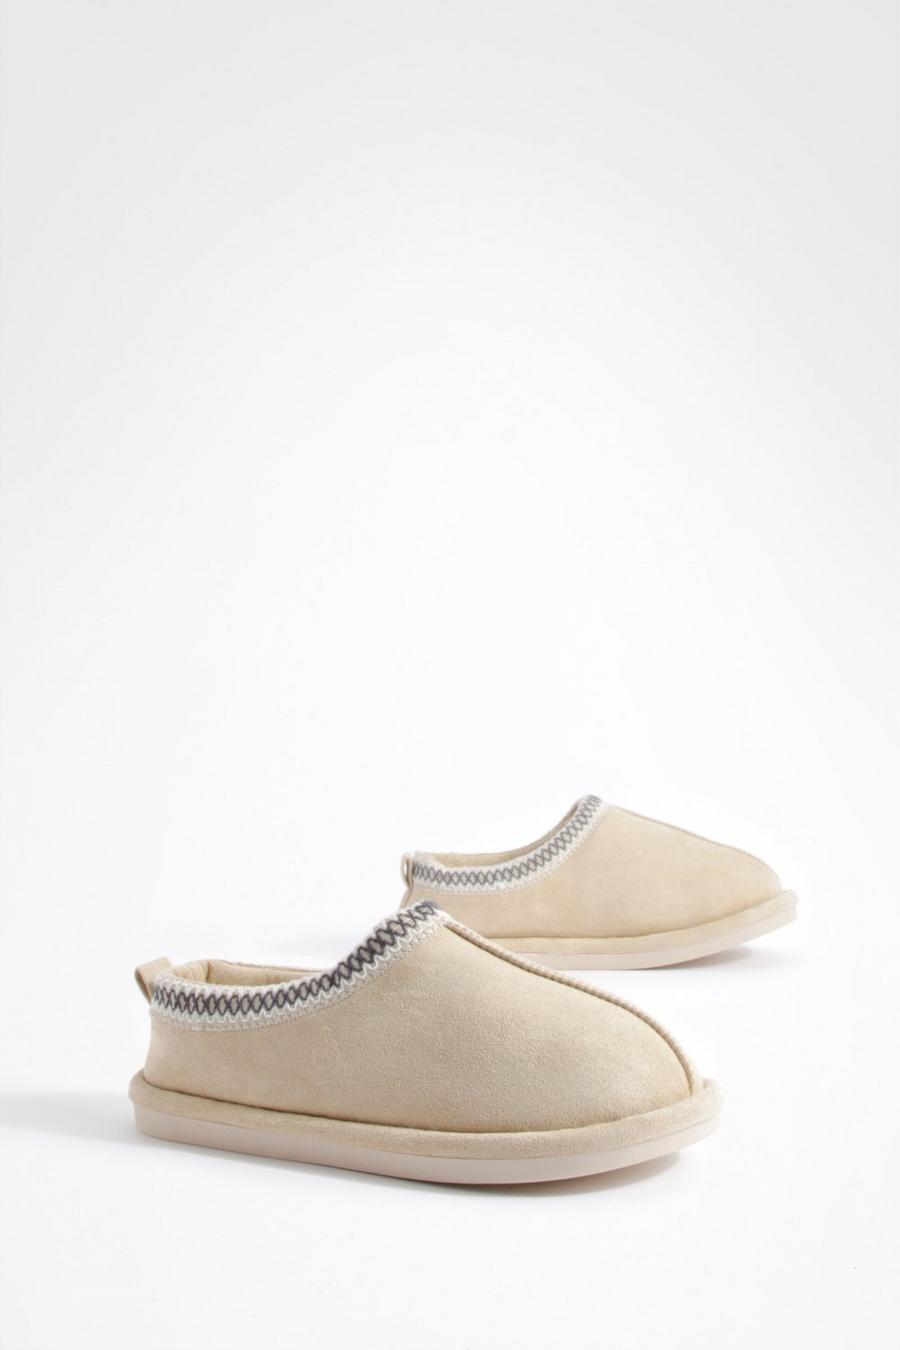 Beige Embroidered Cozy Slip On Mules image number 1